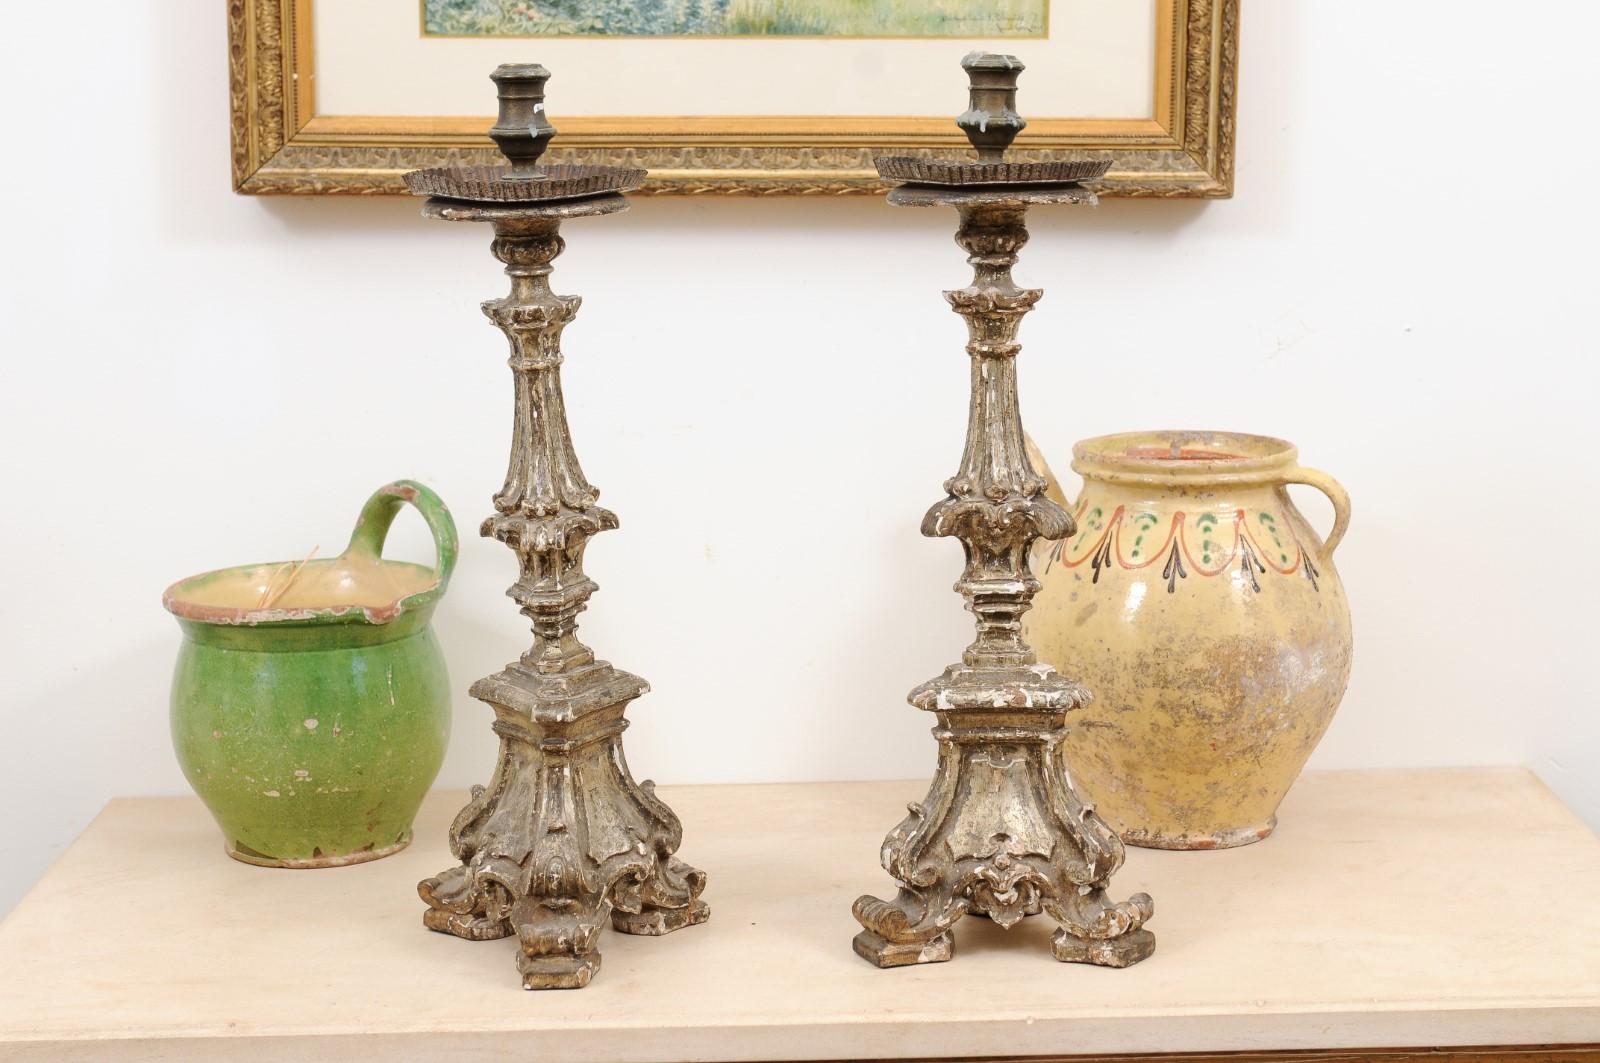 Pair of Rococo Period 18th Century Italian Painted and Carved Candlesticks For Sale 5